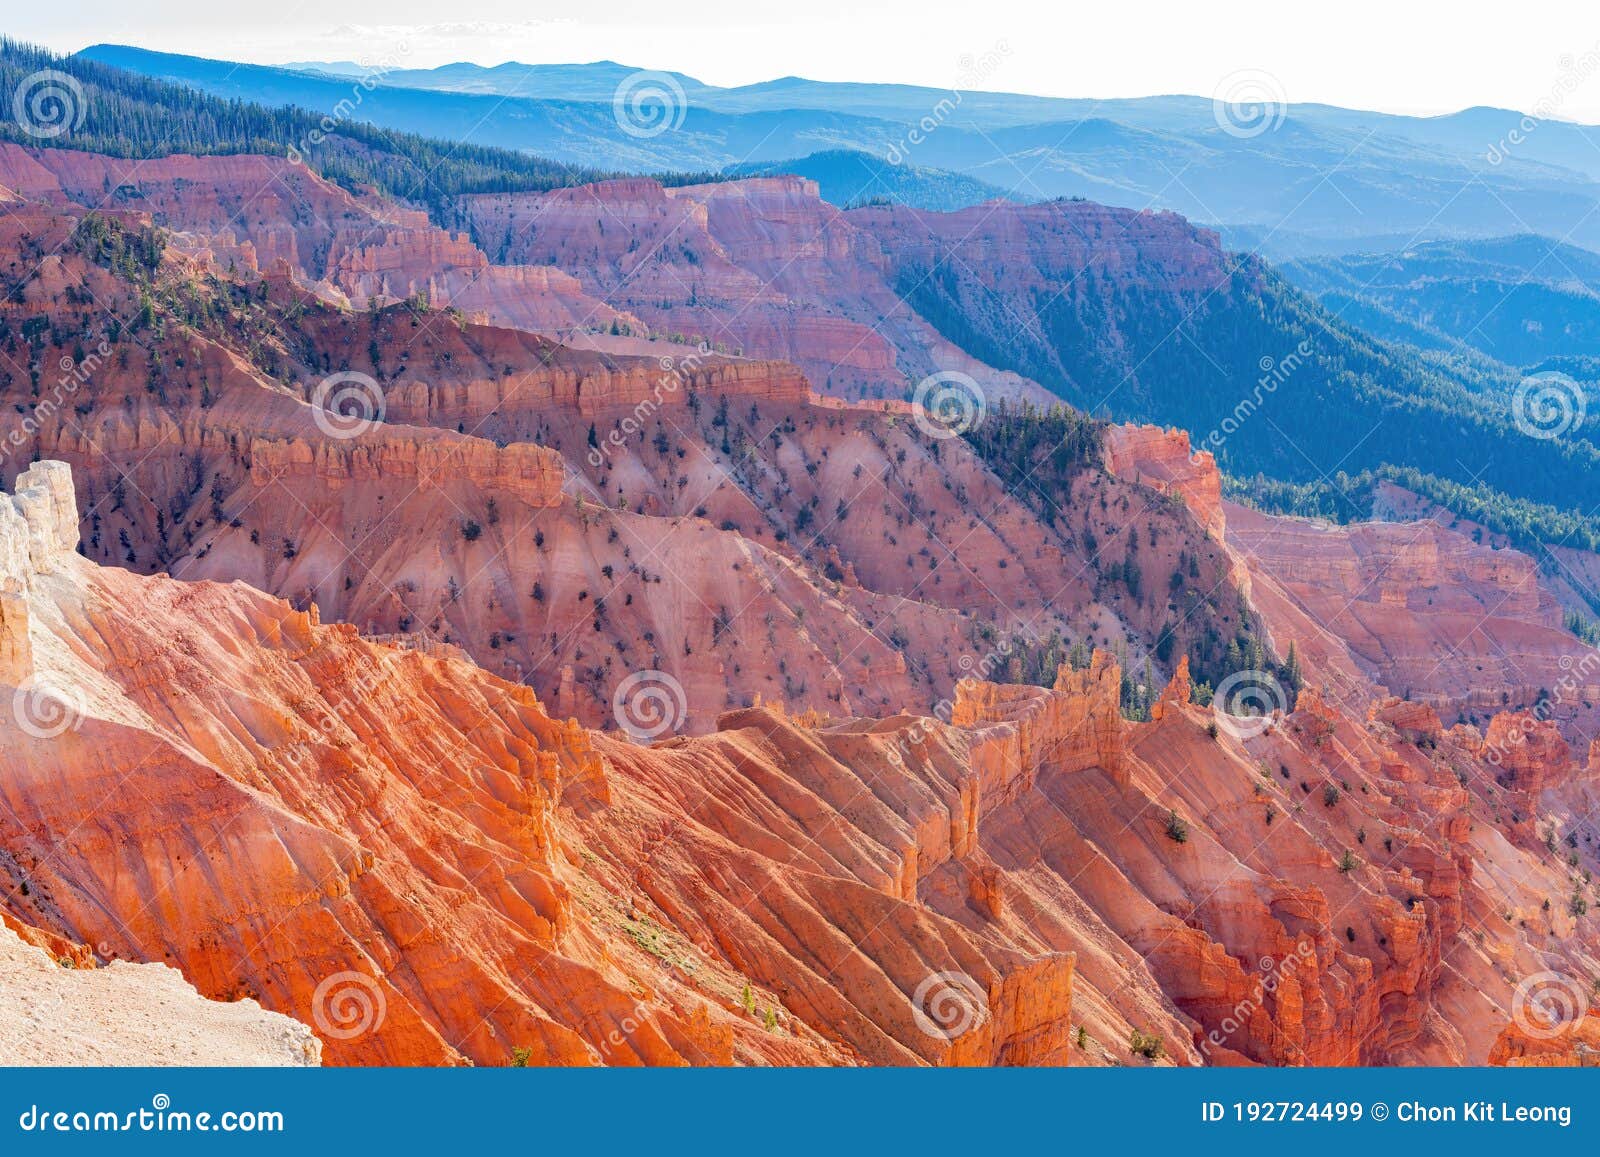 beautiful landscape saw from sunset view overlook of cedar breaks national monument